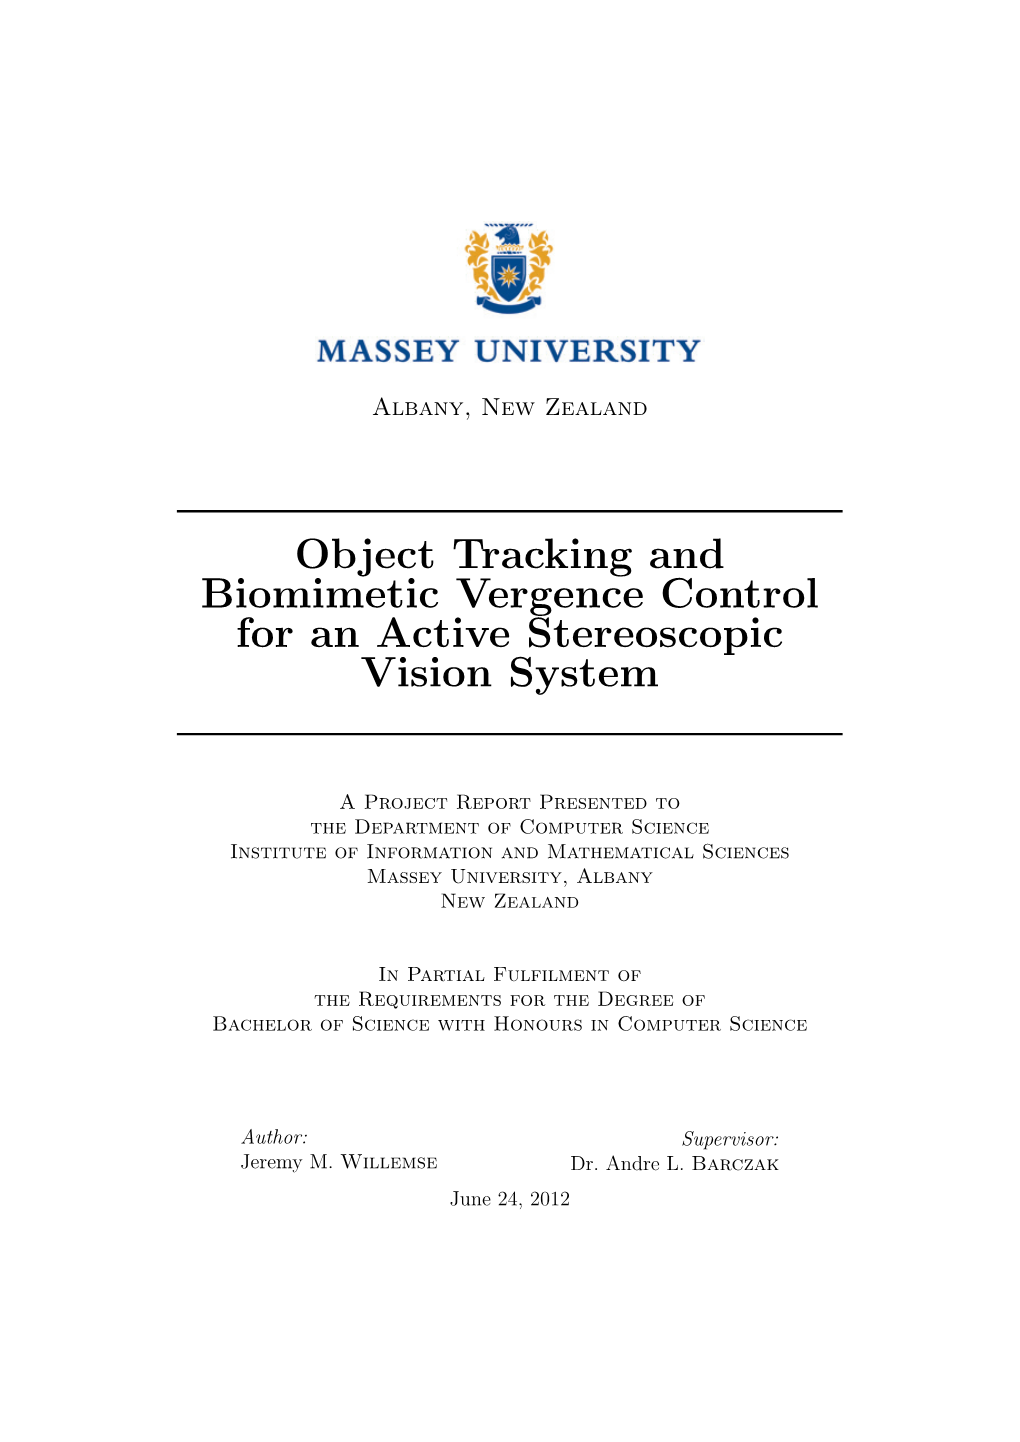 Object Tracking and Biomimetic Vergence Control for an Active Stereoscopic Vision System